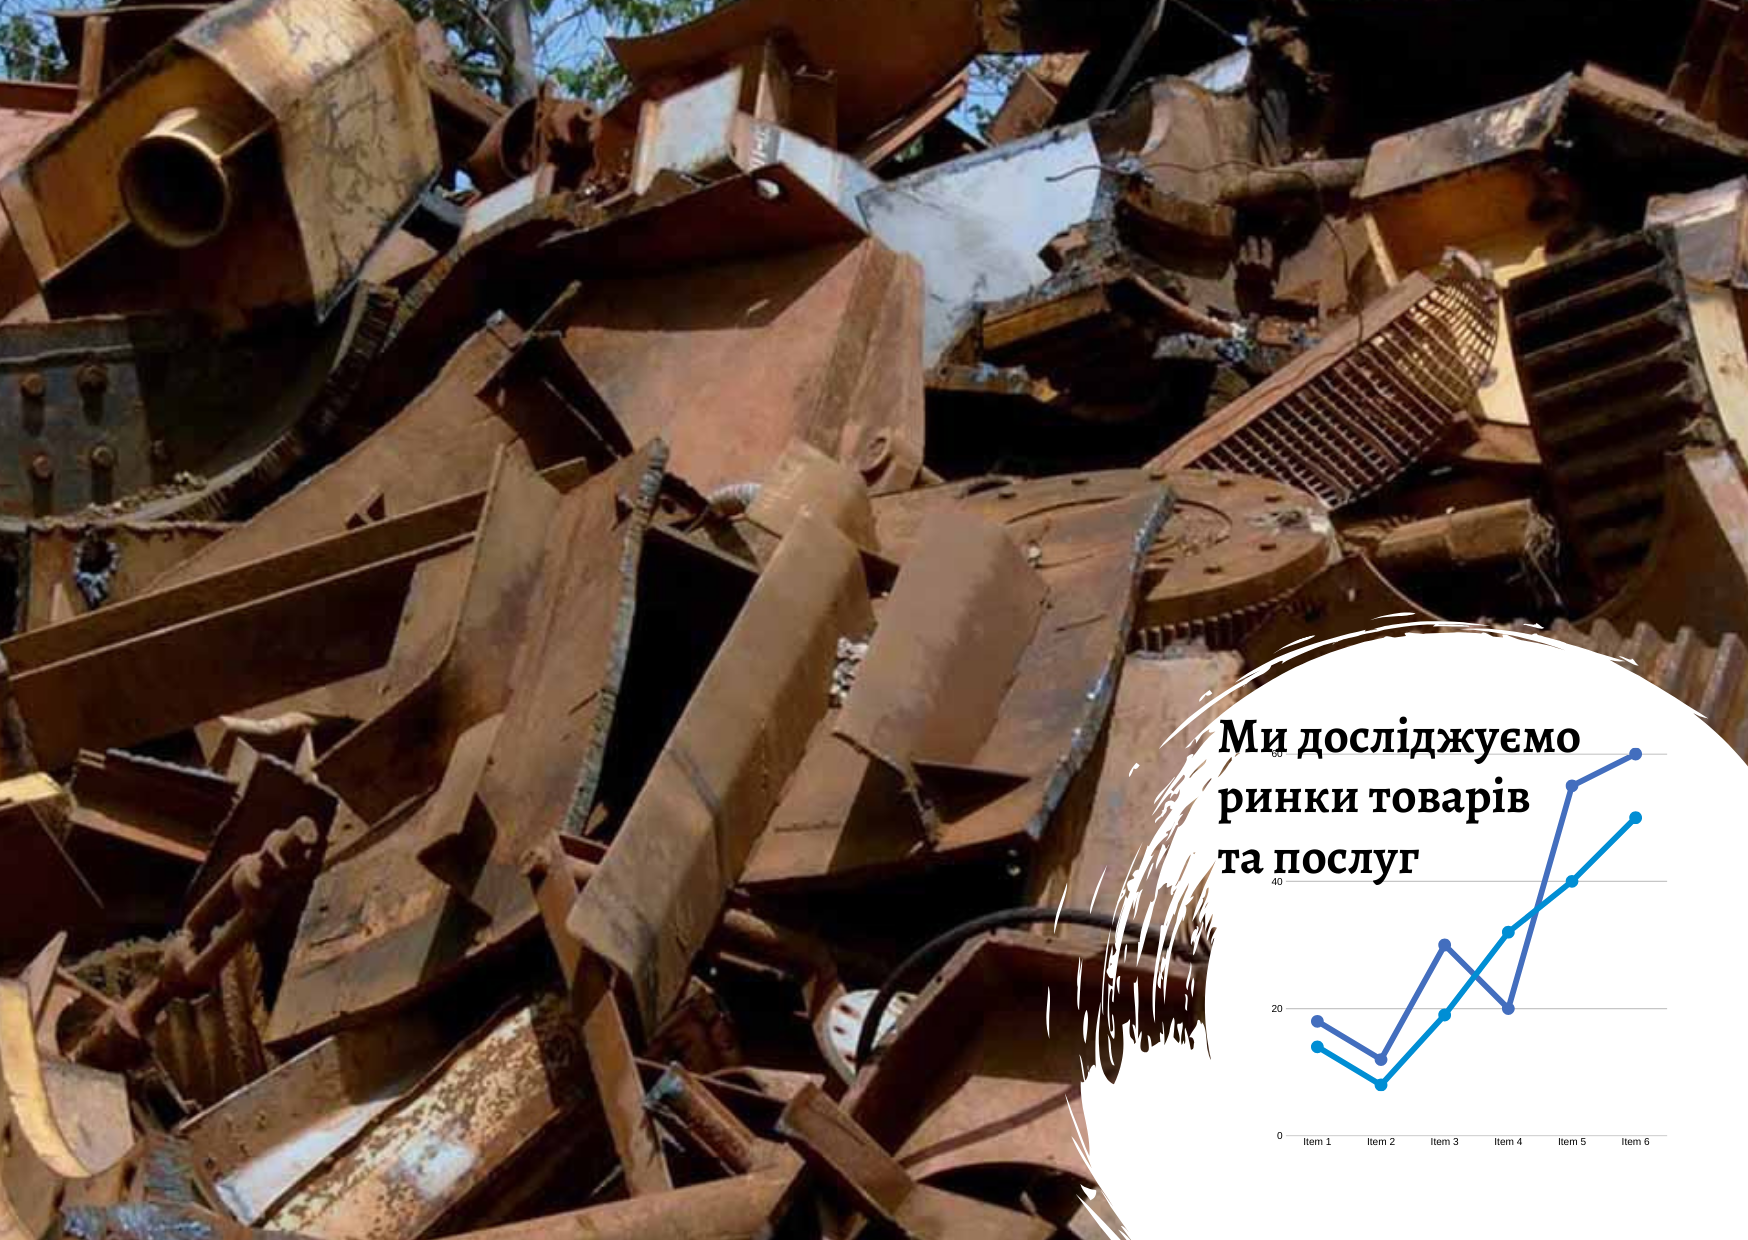 Ukrainian scrap metal market before the start of a large-scale invasion